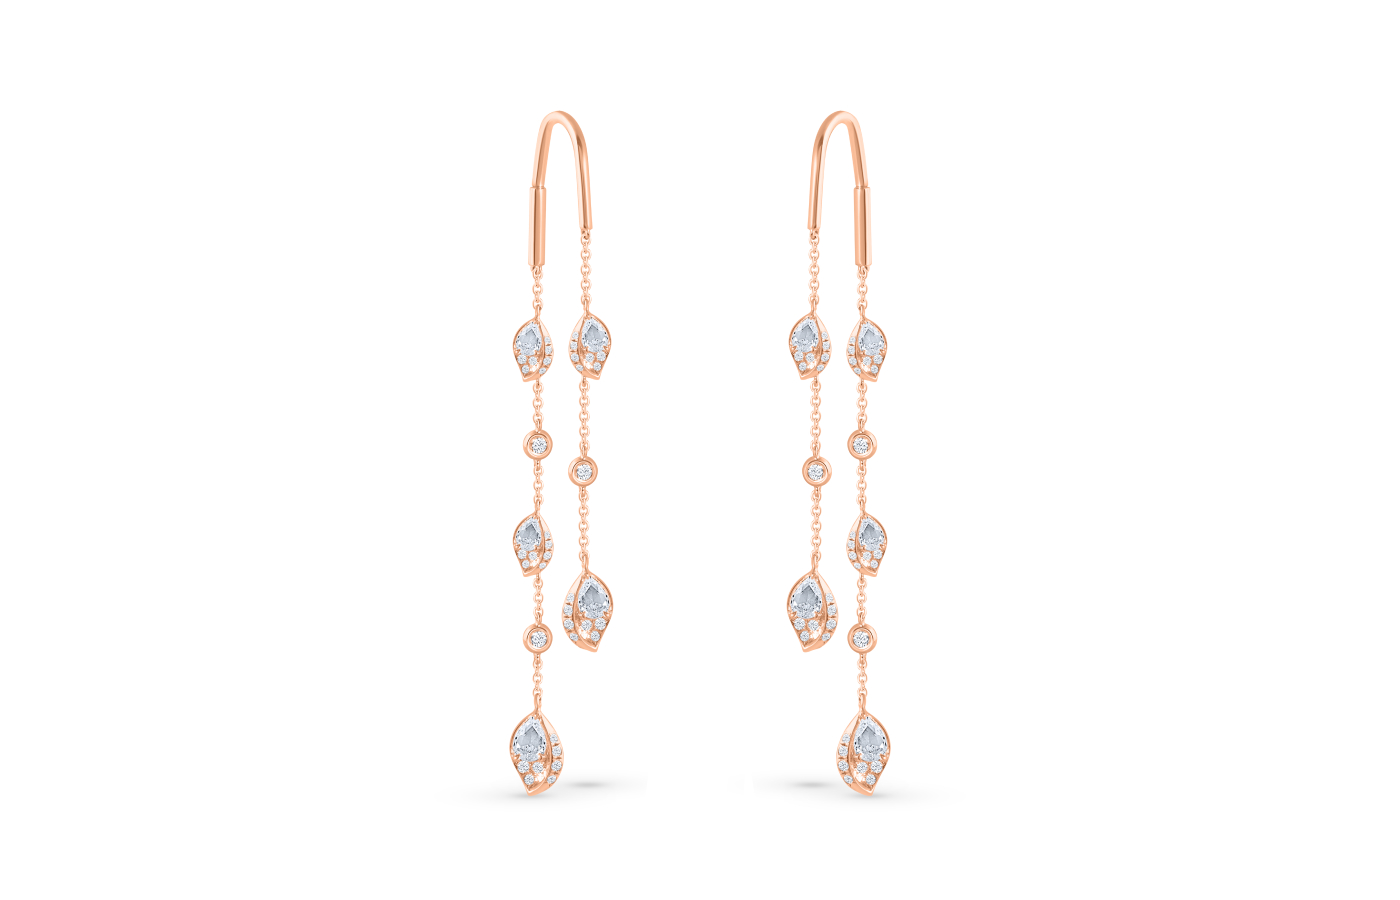 HARAKH Frangipani threader earrings with brilliant and rose-cut diamonds in 18k rose gold 